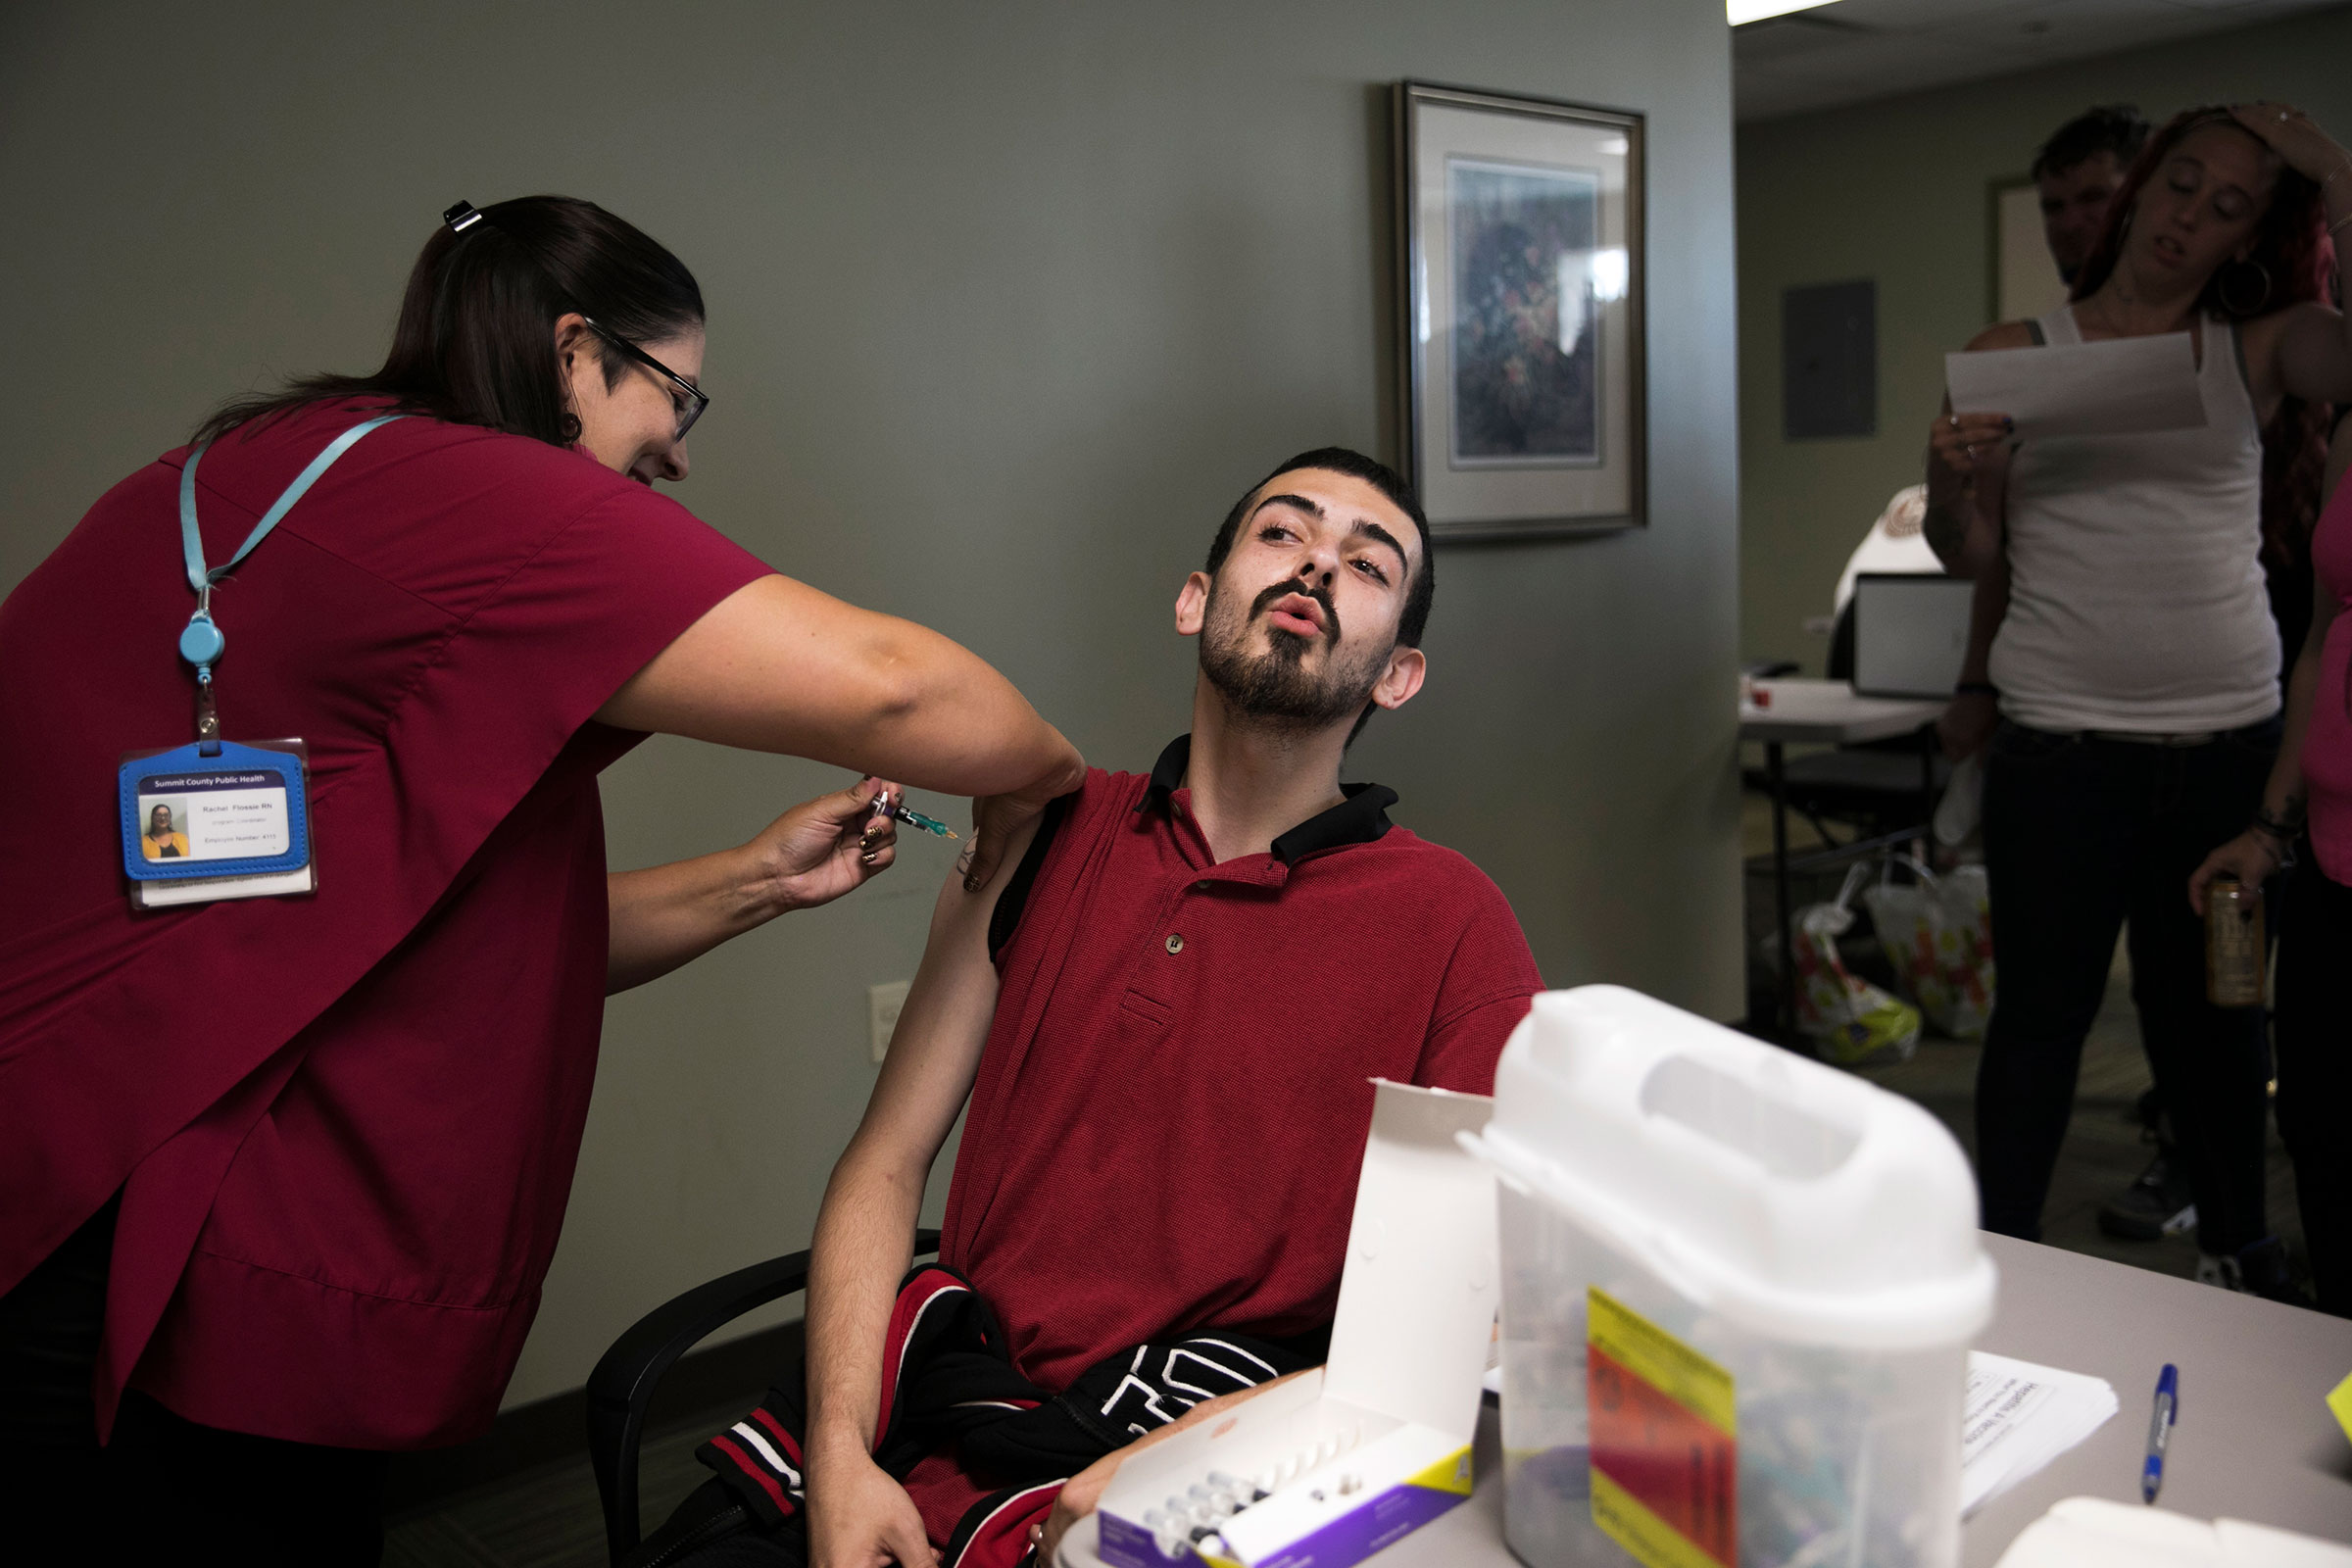 Summit County Public Health nurse Rachel Flossie gives a hepatitis A vaccination to Robert Wolf, 24, during a South Street Ministries program in Akron, Ohio.